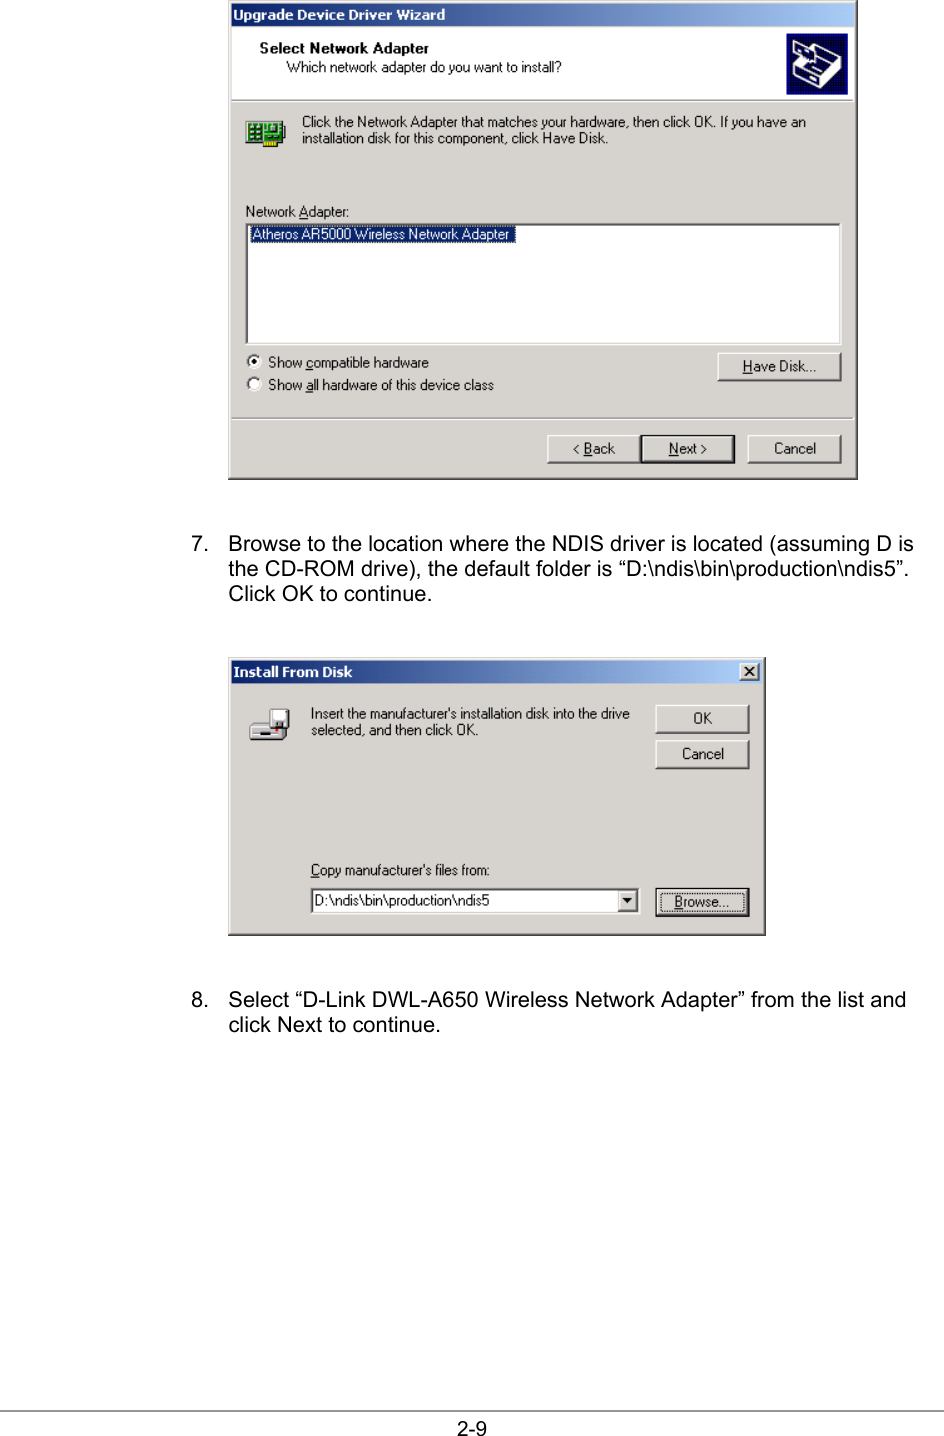  2-9   7.  Browse to the location where the NDIS driver is located (assuming D is the CD-ROM drive), the default folder is “D:\ndis\bin\production\ndis5”. Click OK to continue.   8.  Select “D-Link DWL-A650 Wireless Network Adapter” from the list and click Next to continue. 